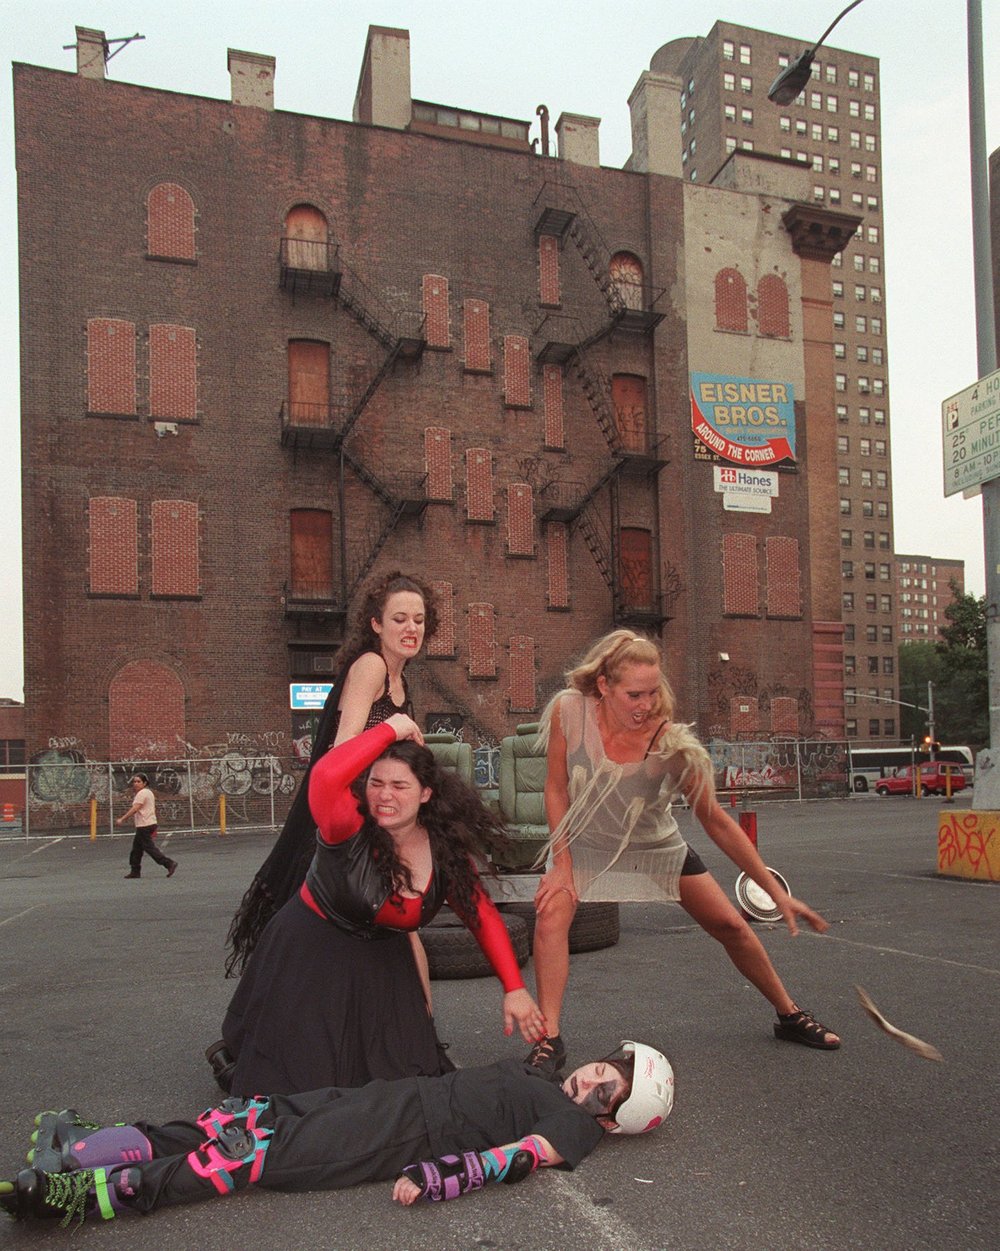  Members of Expanded Arts theater rehearse a scene from William Shakepeare's Macbeth in a parking lot on Manhattan's Lower East Side before a performance Wednesday, Aug. 13, 1997.  Clockwise from lower left are; Harriet Spitzer as Fleance, Cassie Rol